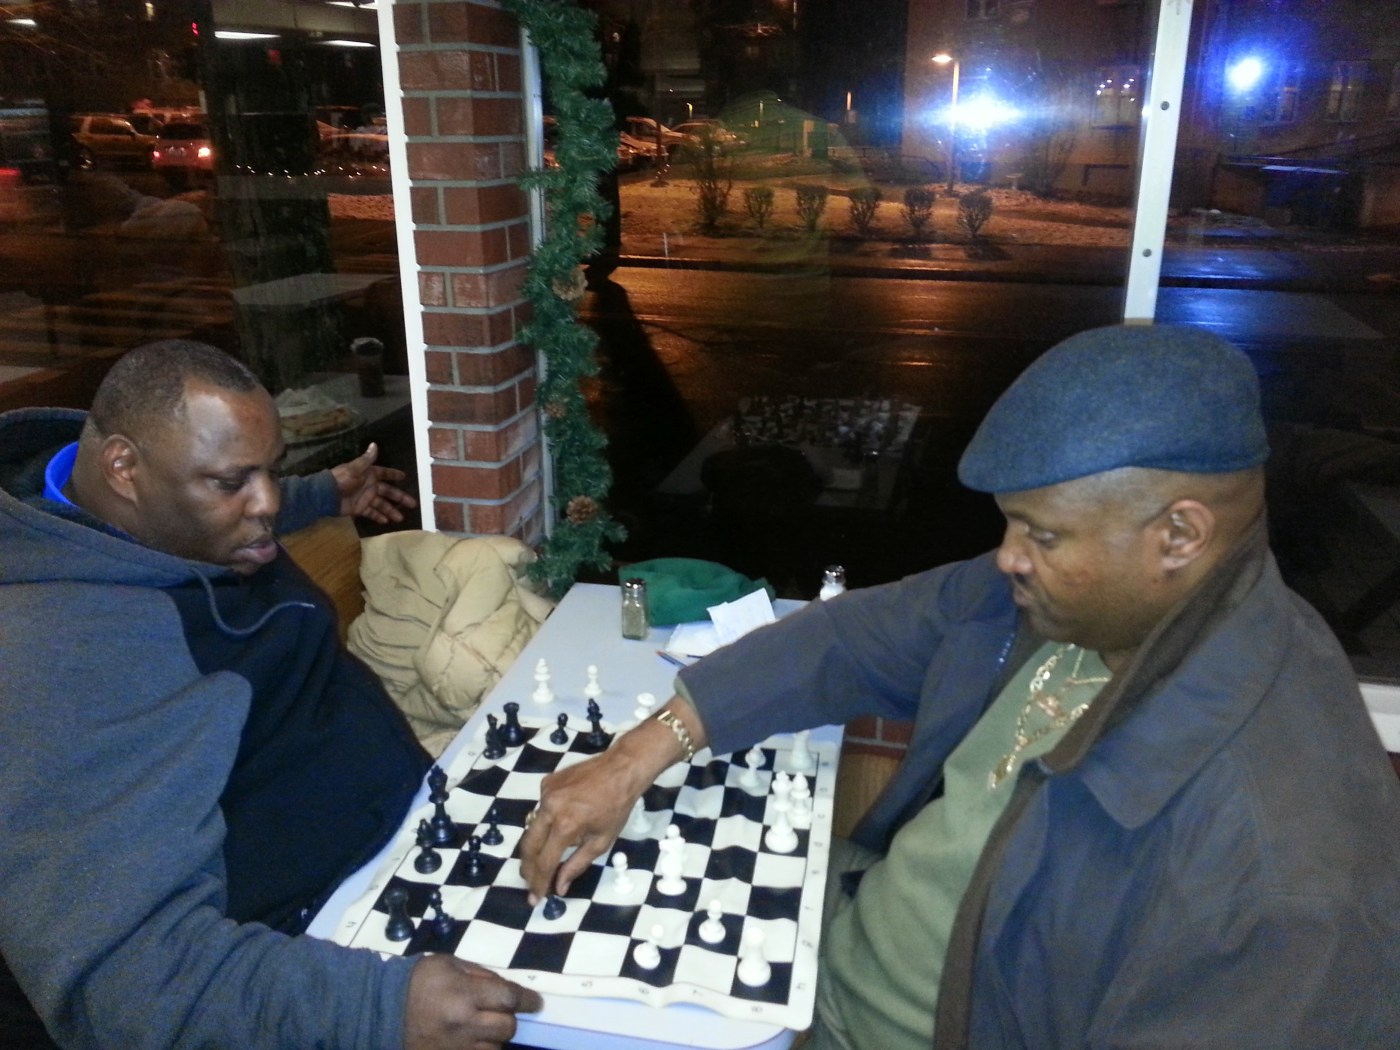 Two men play chess inside.